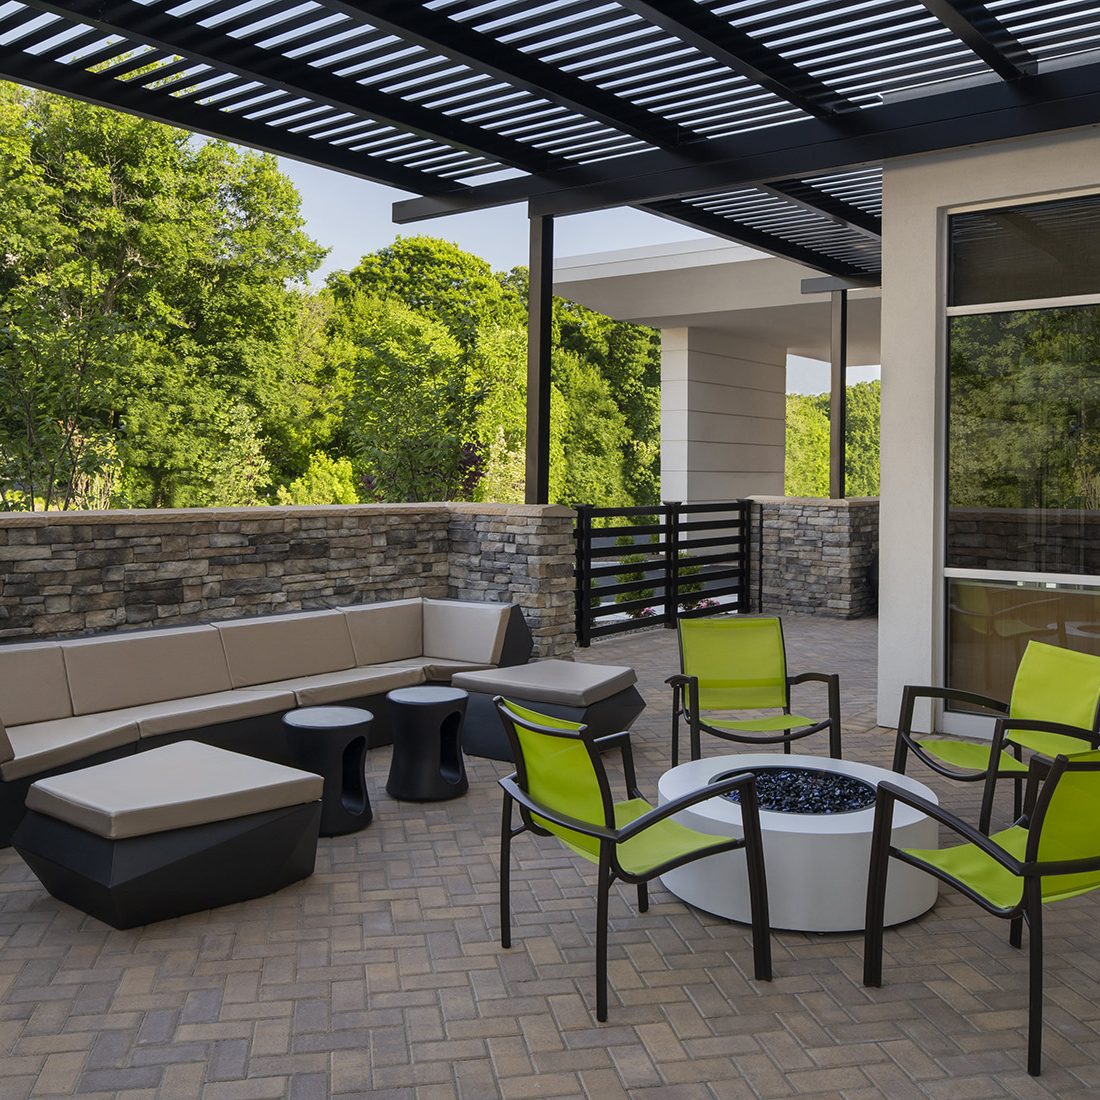 Exterior common area, Springhill Suites by Marriott, Westchester